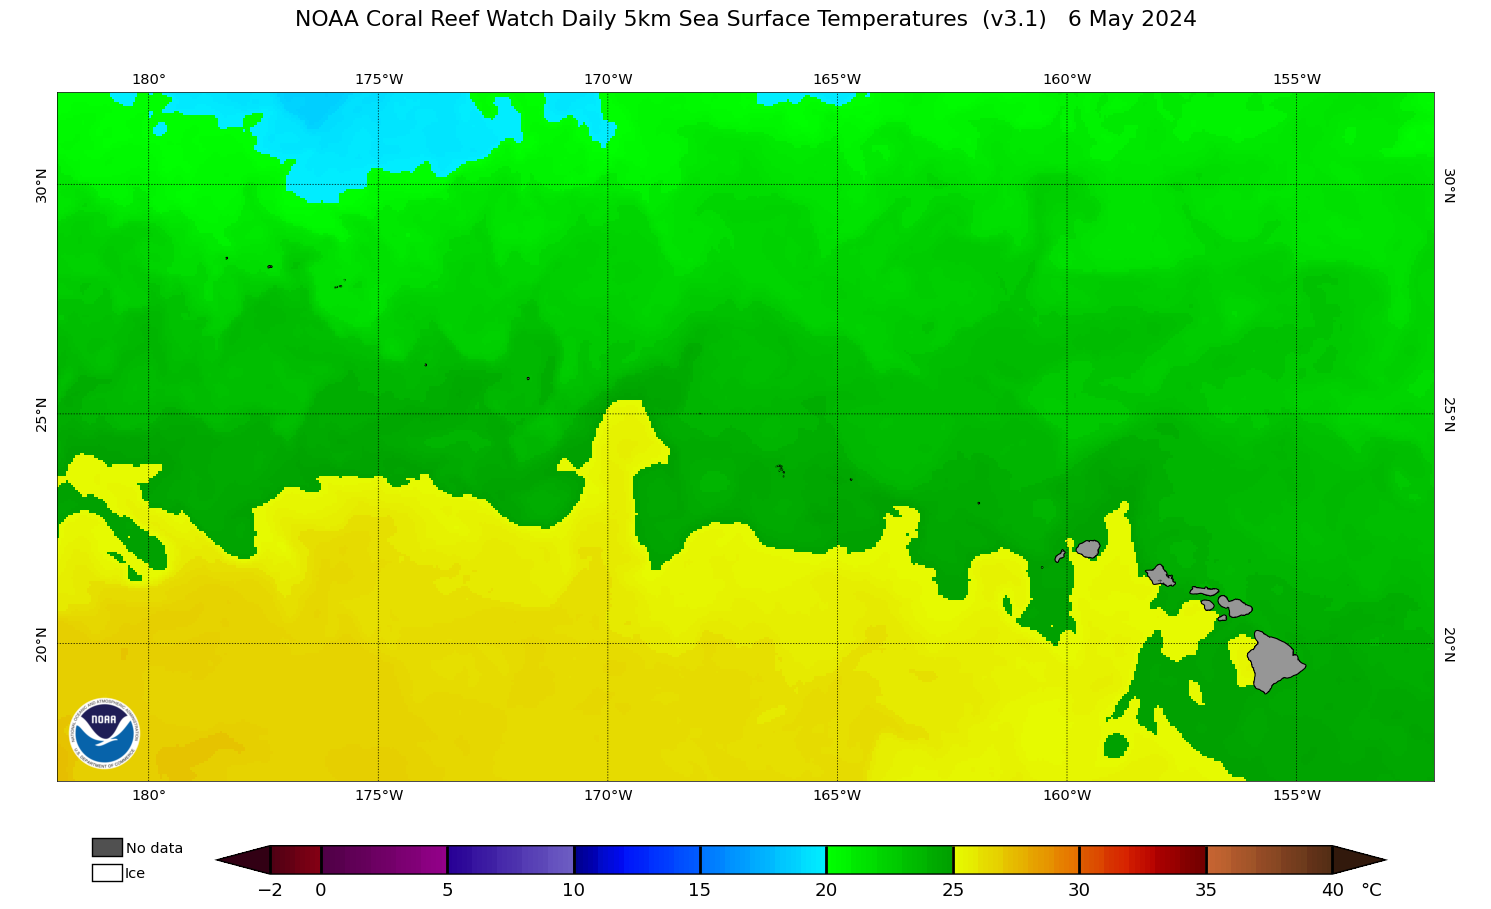 SST map - Sea Surface Temperature. Zone: Hawaii